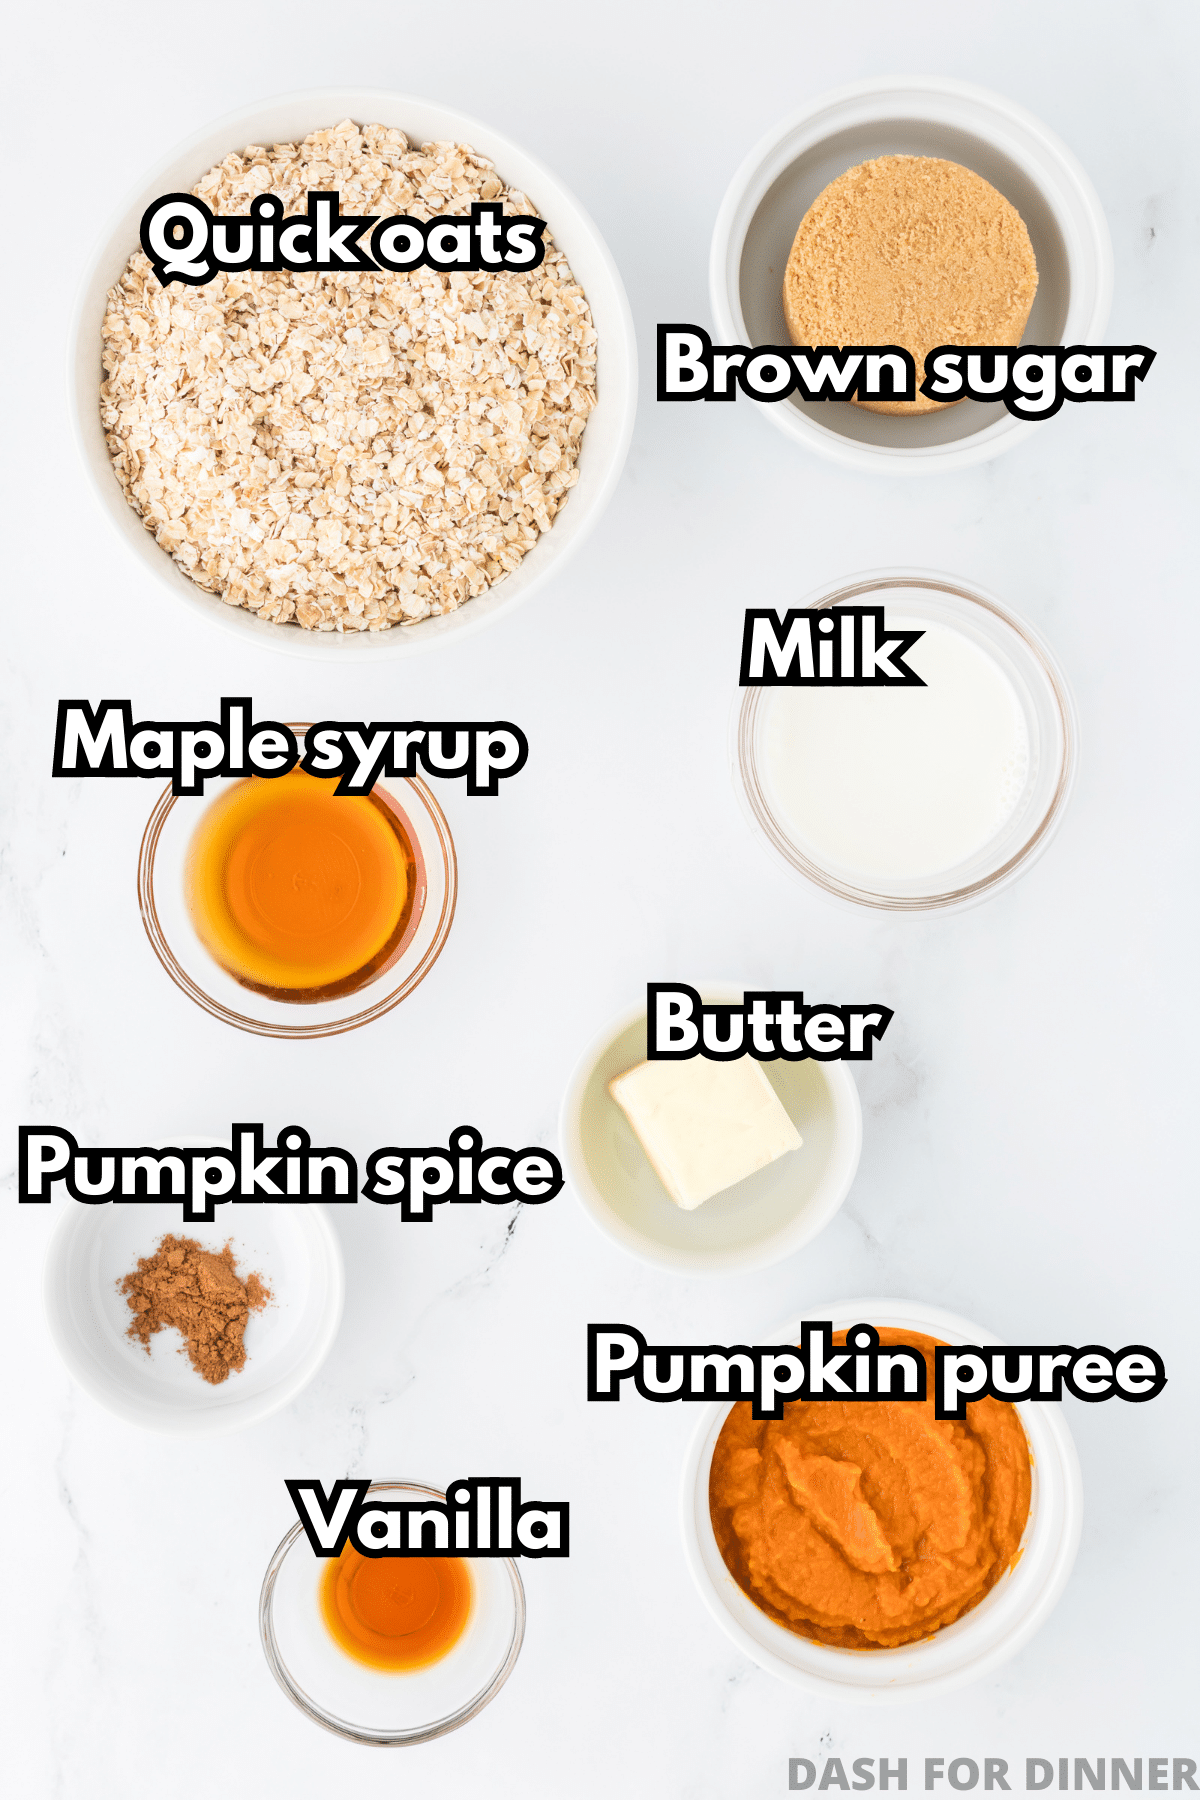 The ingredients needed to make pumpkin no bake cookies: oats, brown sugar, milk, butter, maple syrup, pumpkin puree, spices, and vanilla.